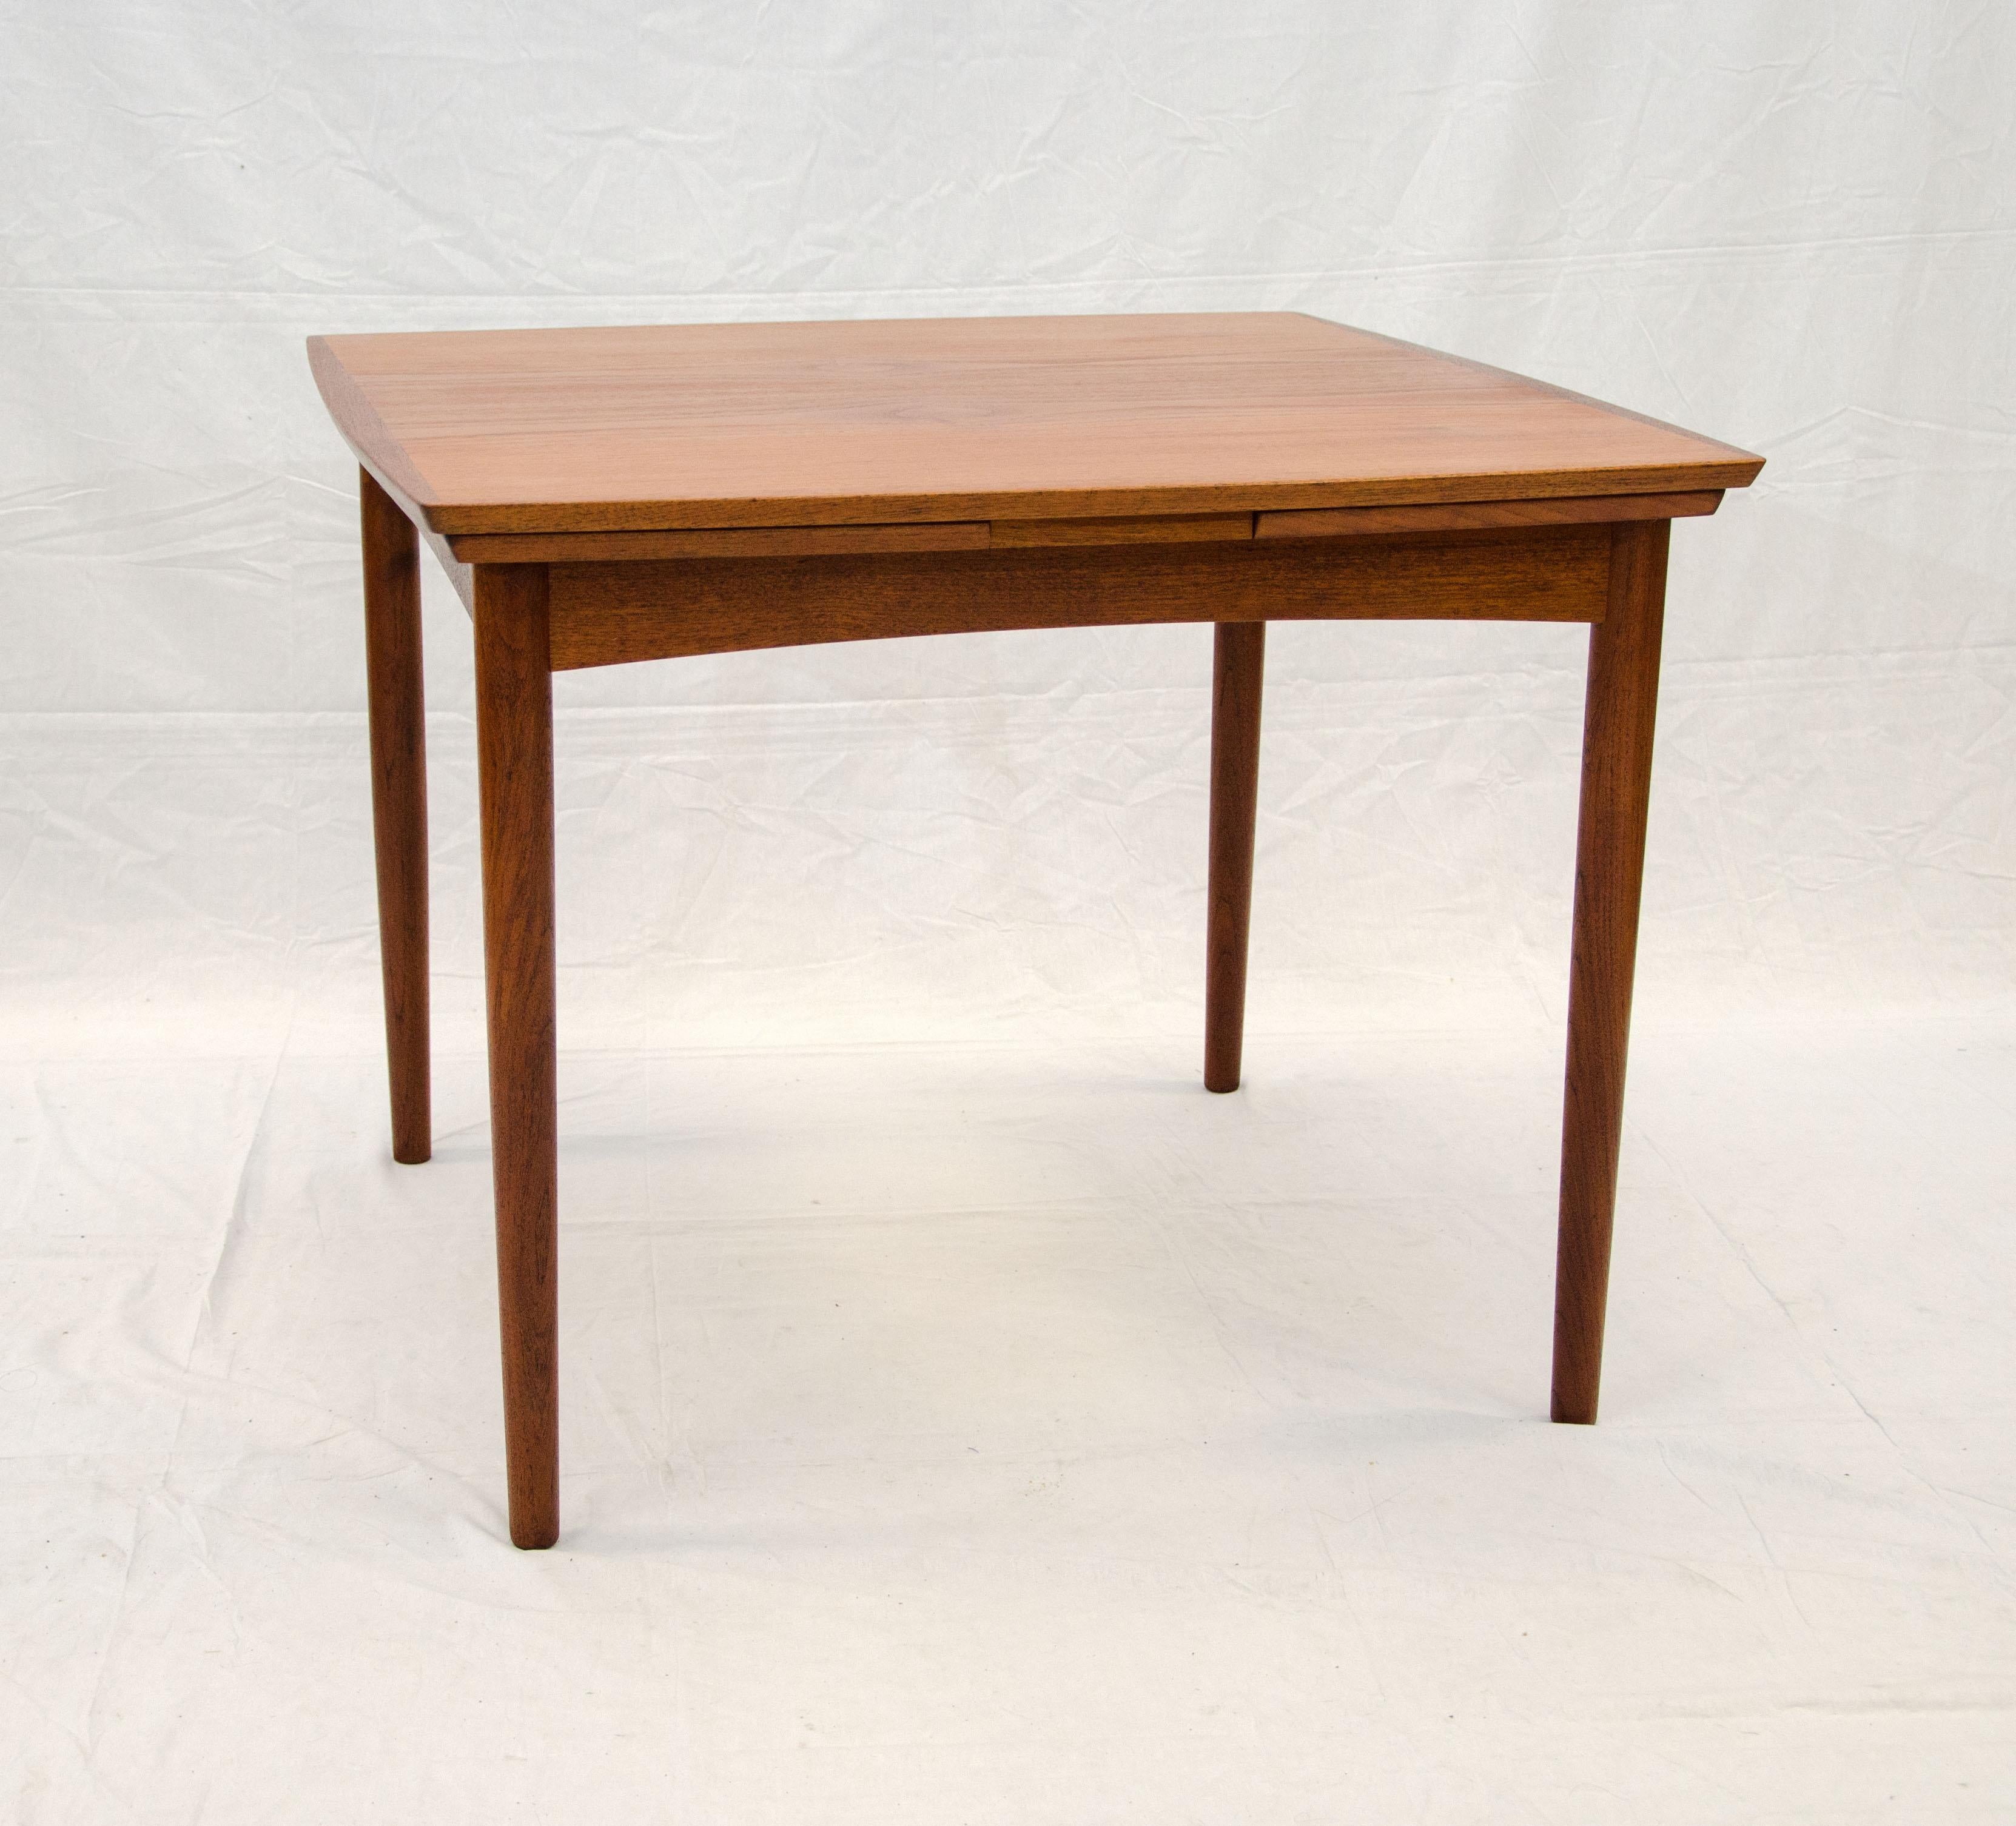 Nice small Danish teak table perfect for a small dining or breakfast area. The table has round tapered legs and two 12 3/4